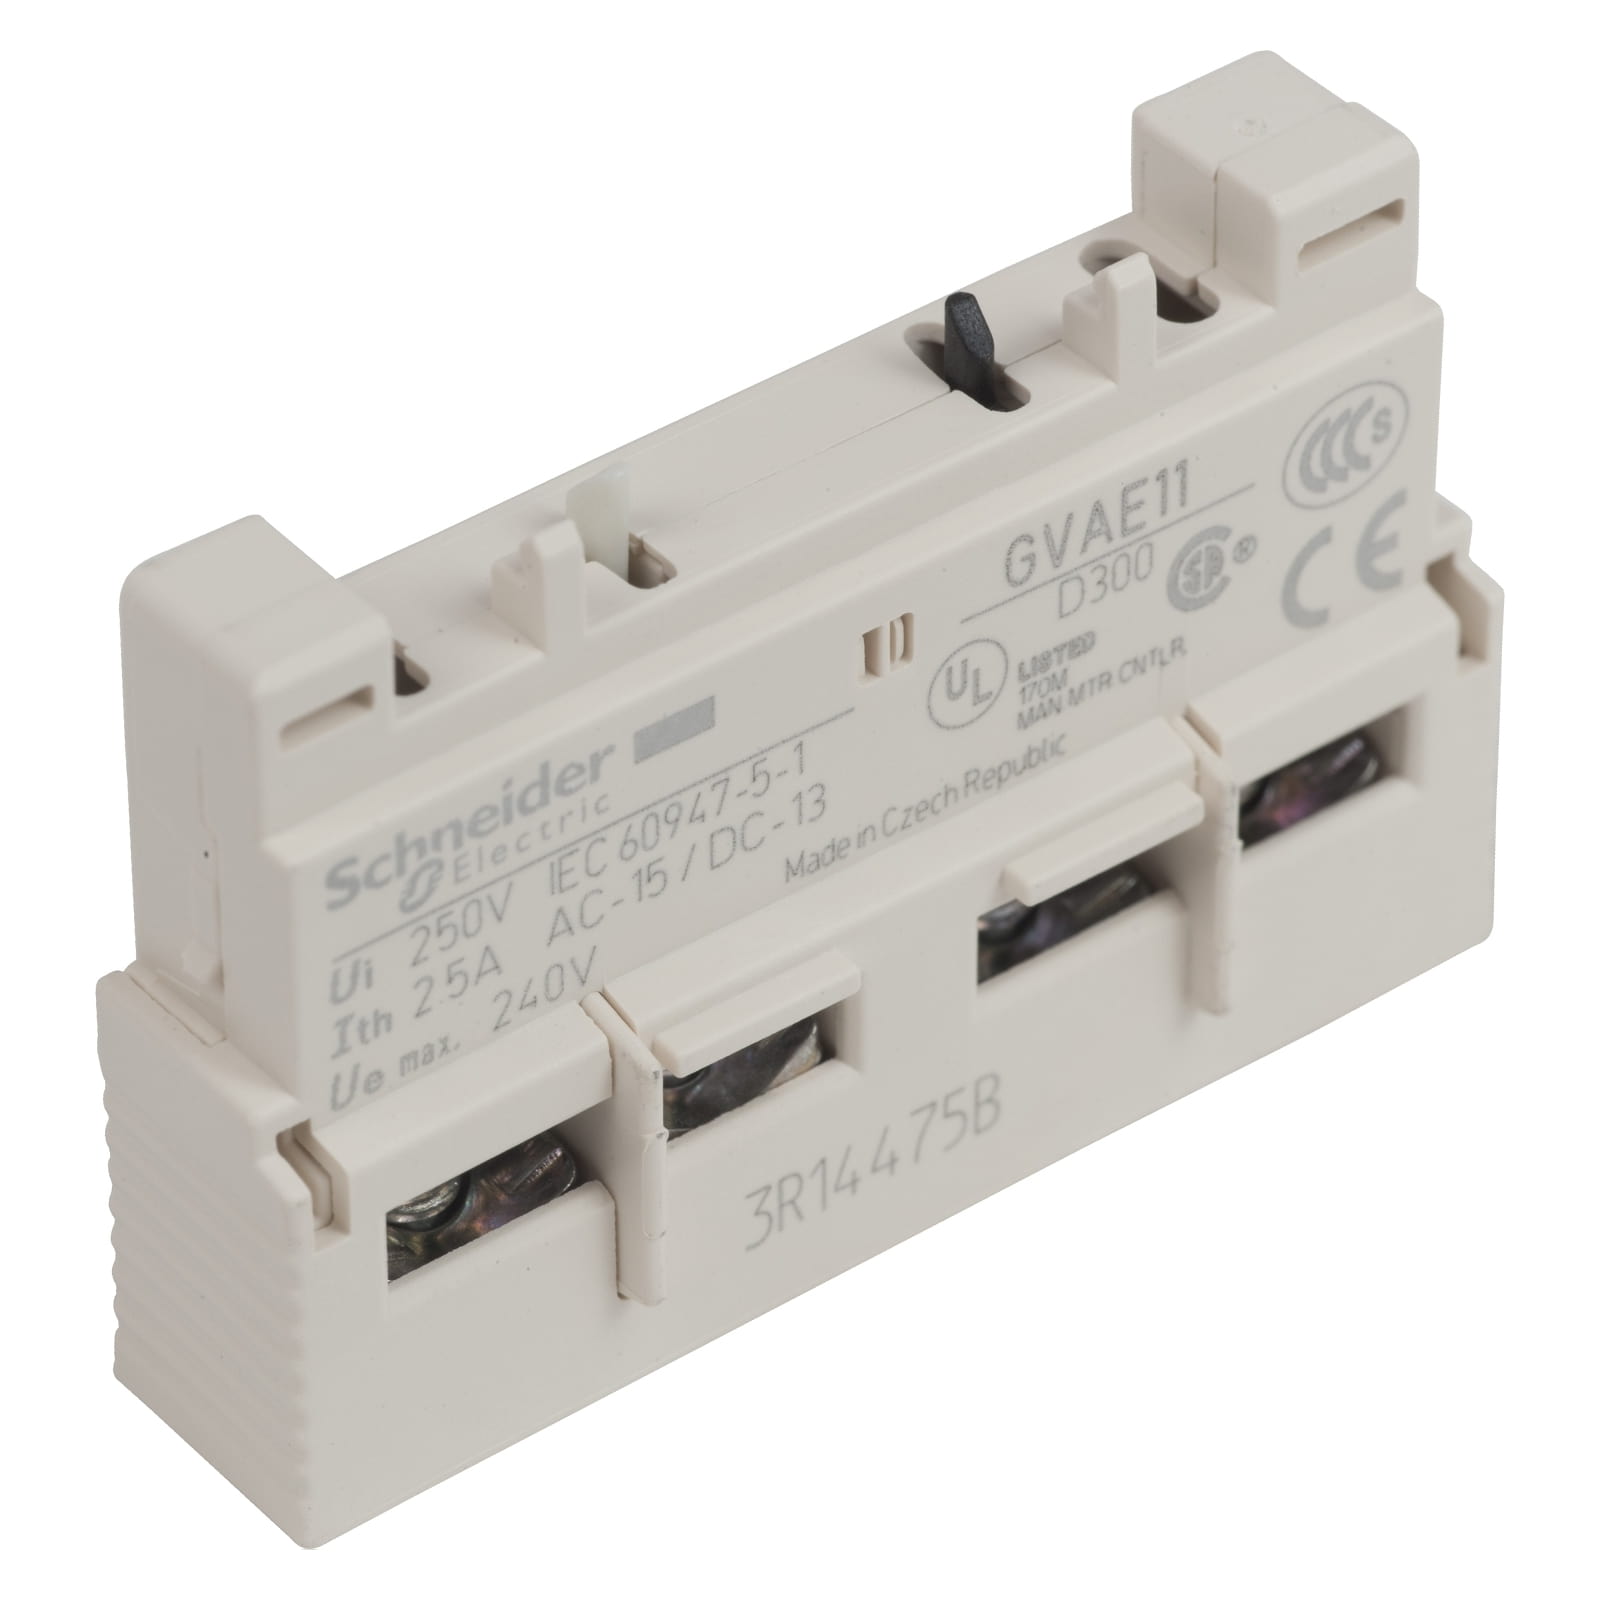 Ships FREE GR130 New Schneider Electric Auxiliary Contact Block GVAE11 